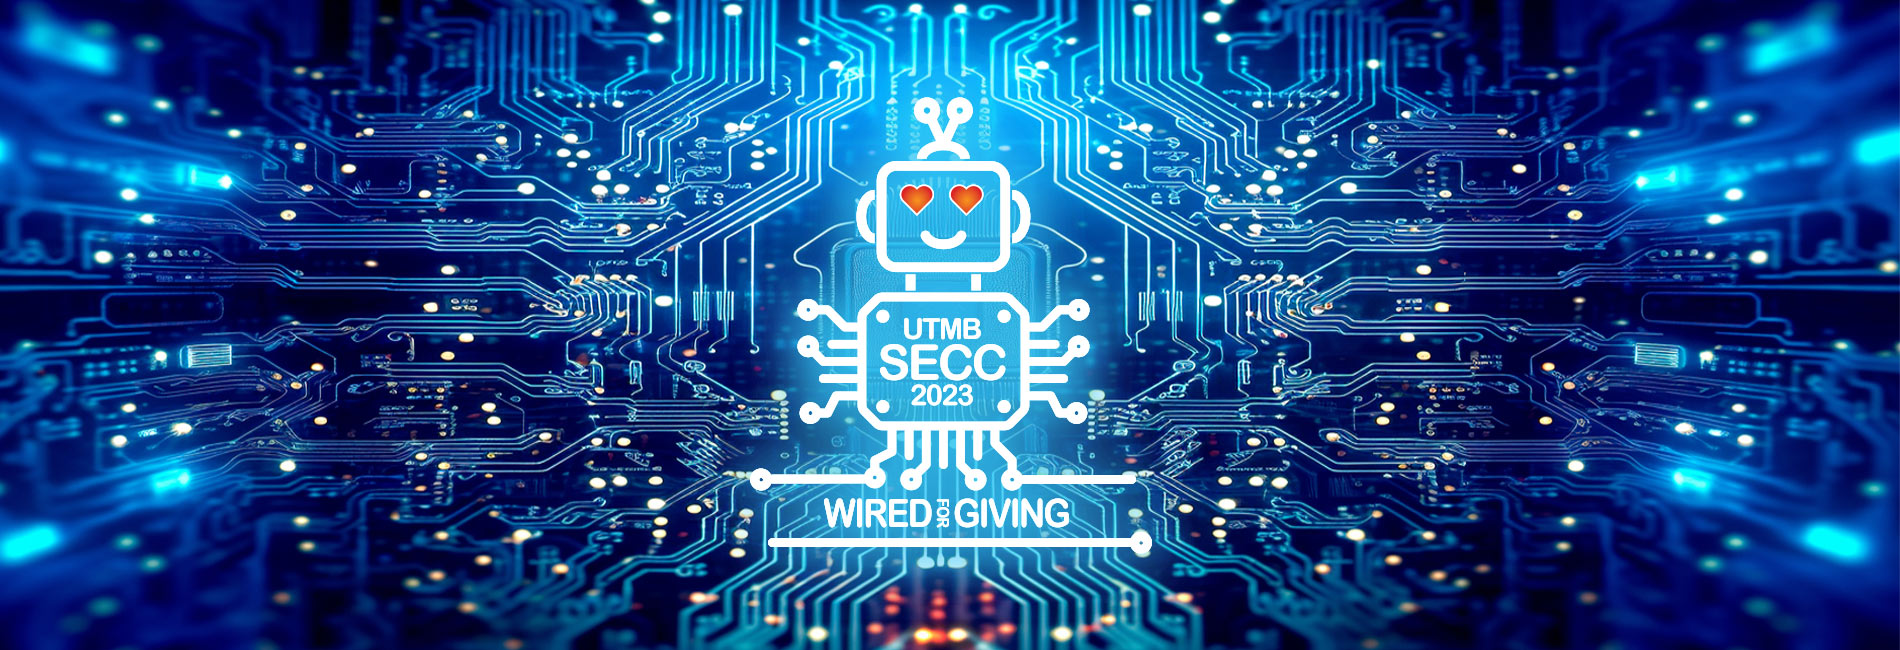 UTMB SECC 2023: Wired To Care and Wired For Giving